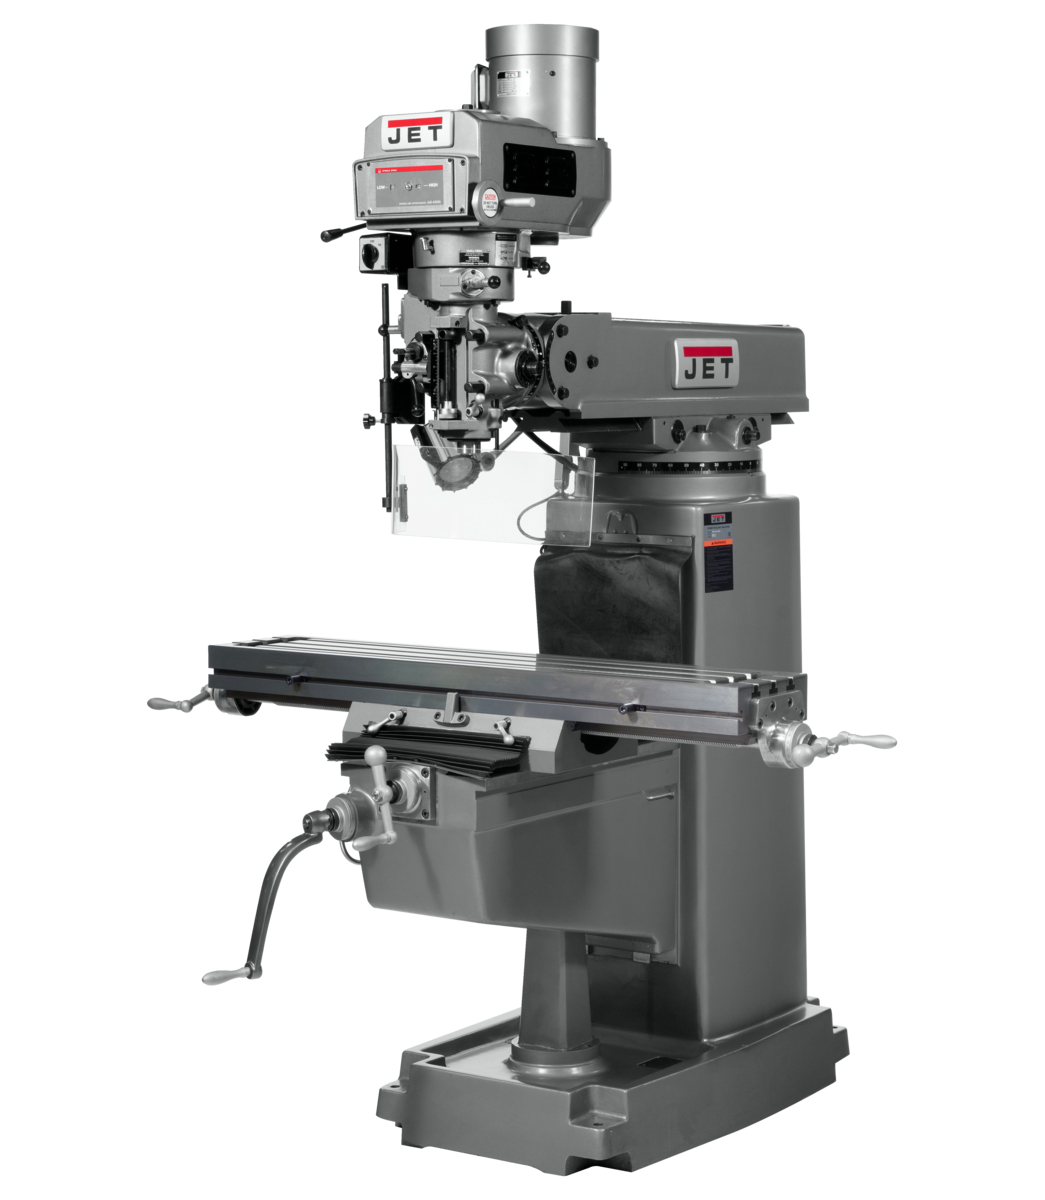 690159, JTM-1050 Mill with 3-axis ACU-RITE 203 DRO (Quill), X & Y Powerfeed Installed, Jet, Metalworking, Milling, Vertical Mills